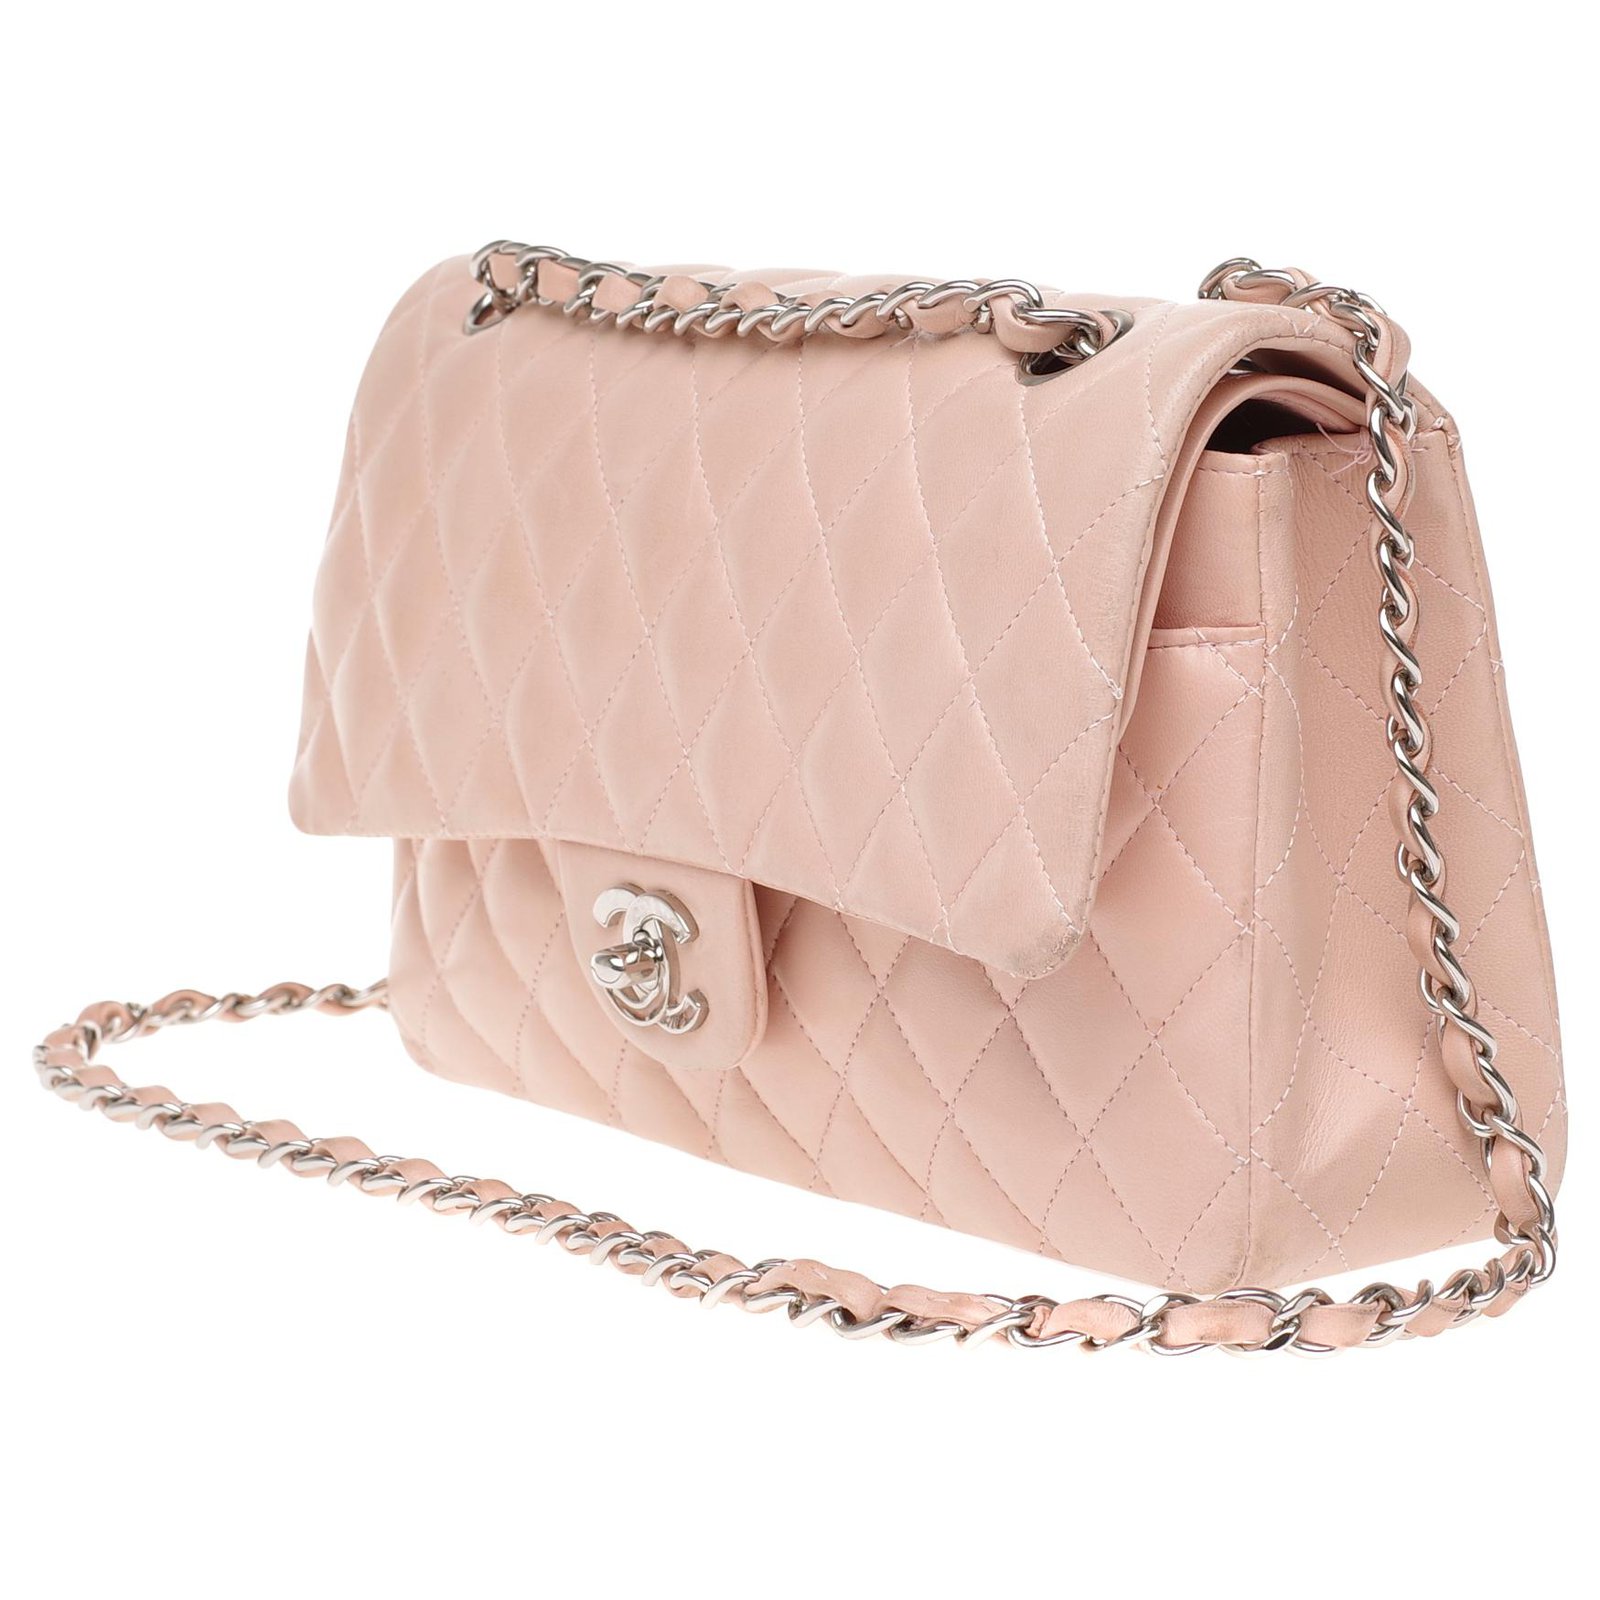 Superb Chanel Timeless medium bag (25cm) in pink quilted leather